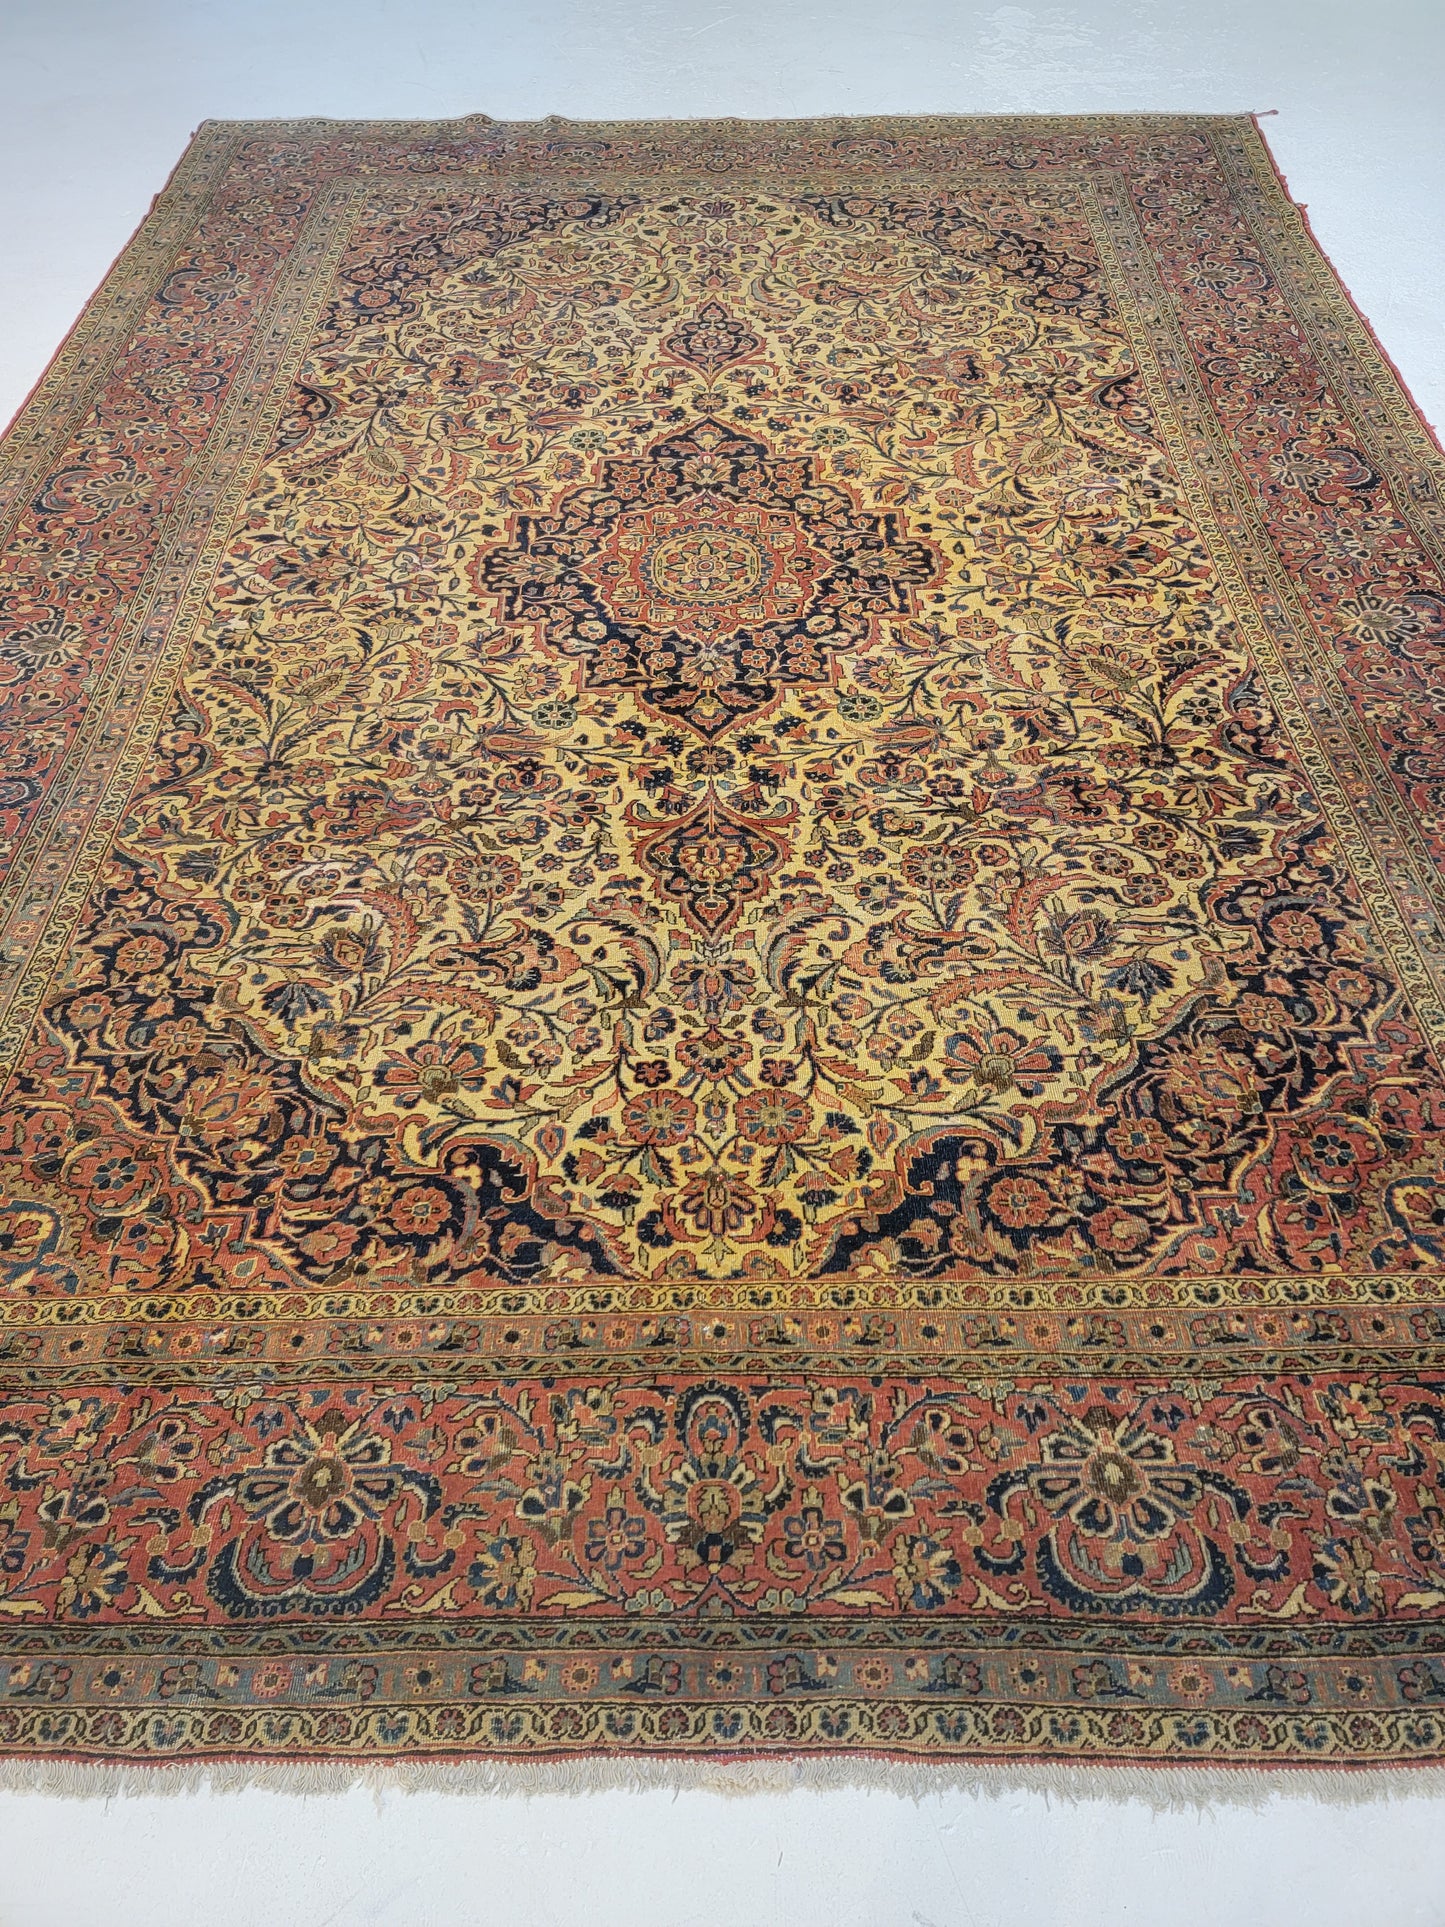 Antique Hand-Knotted Wool Area Rug Kashan 8'4" x 11'7"